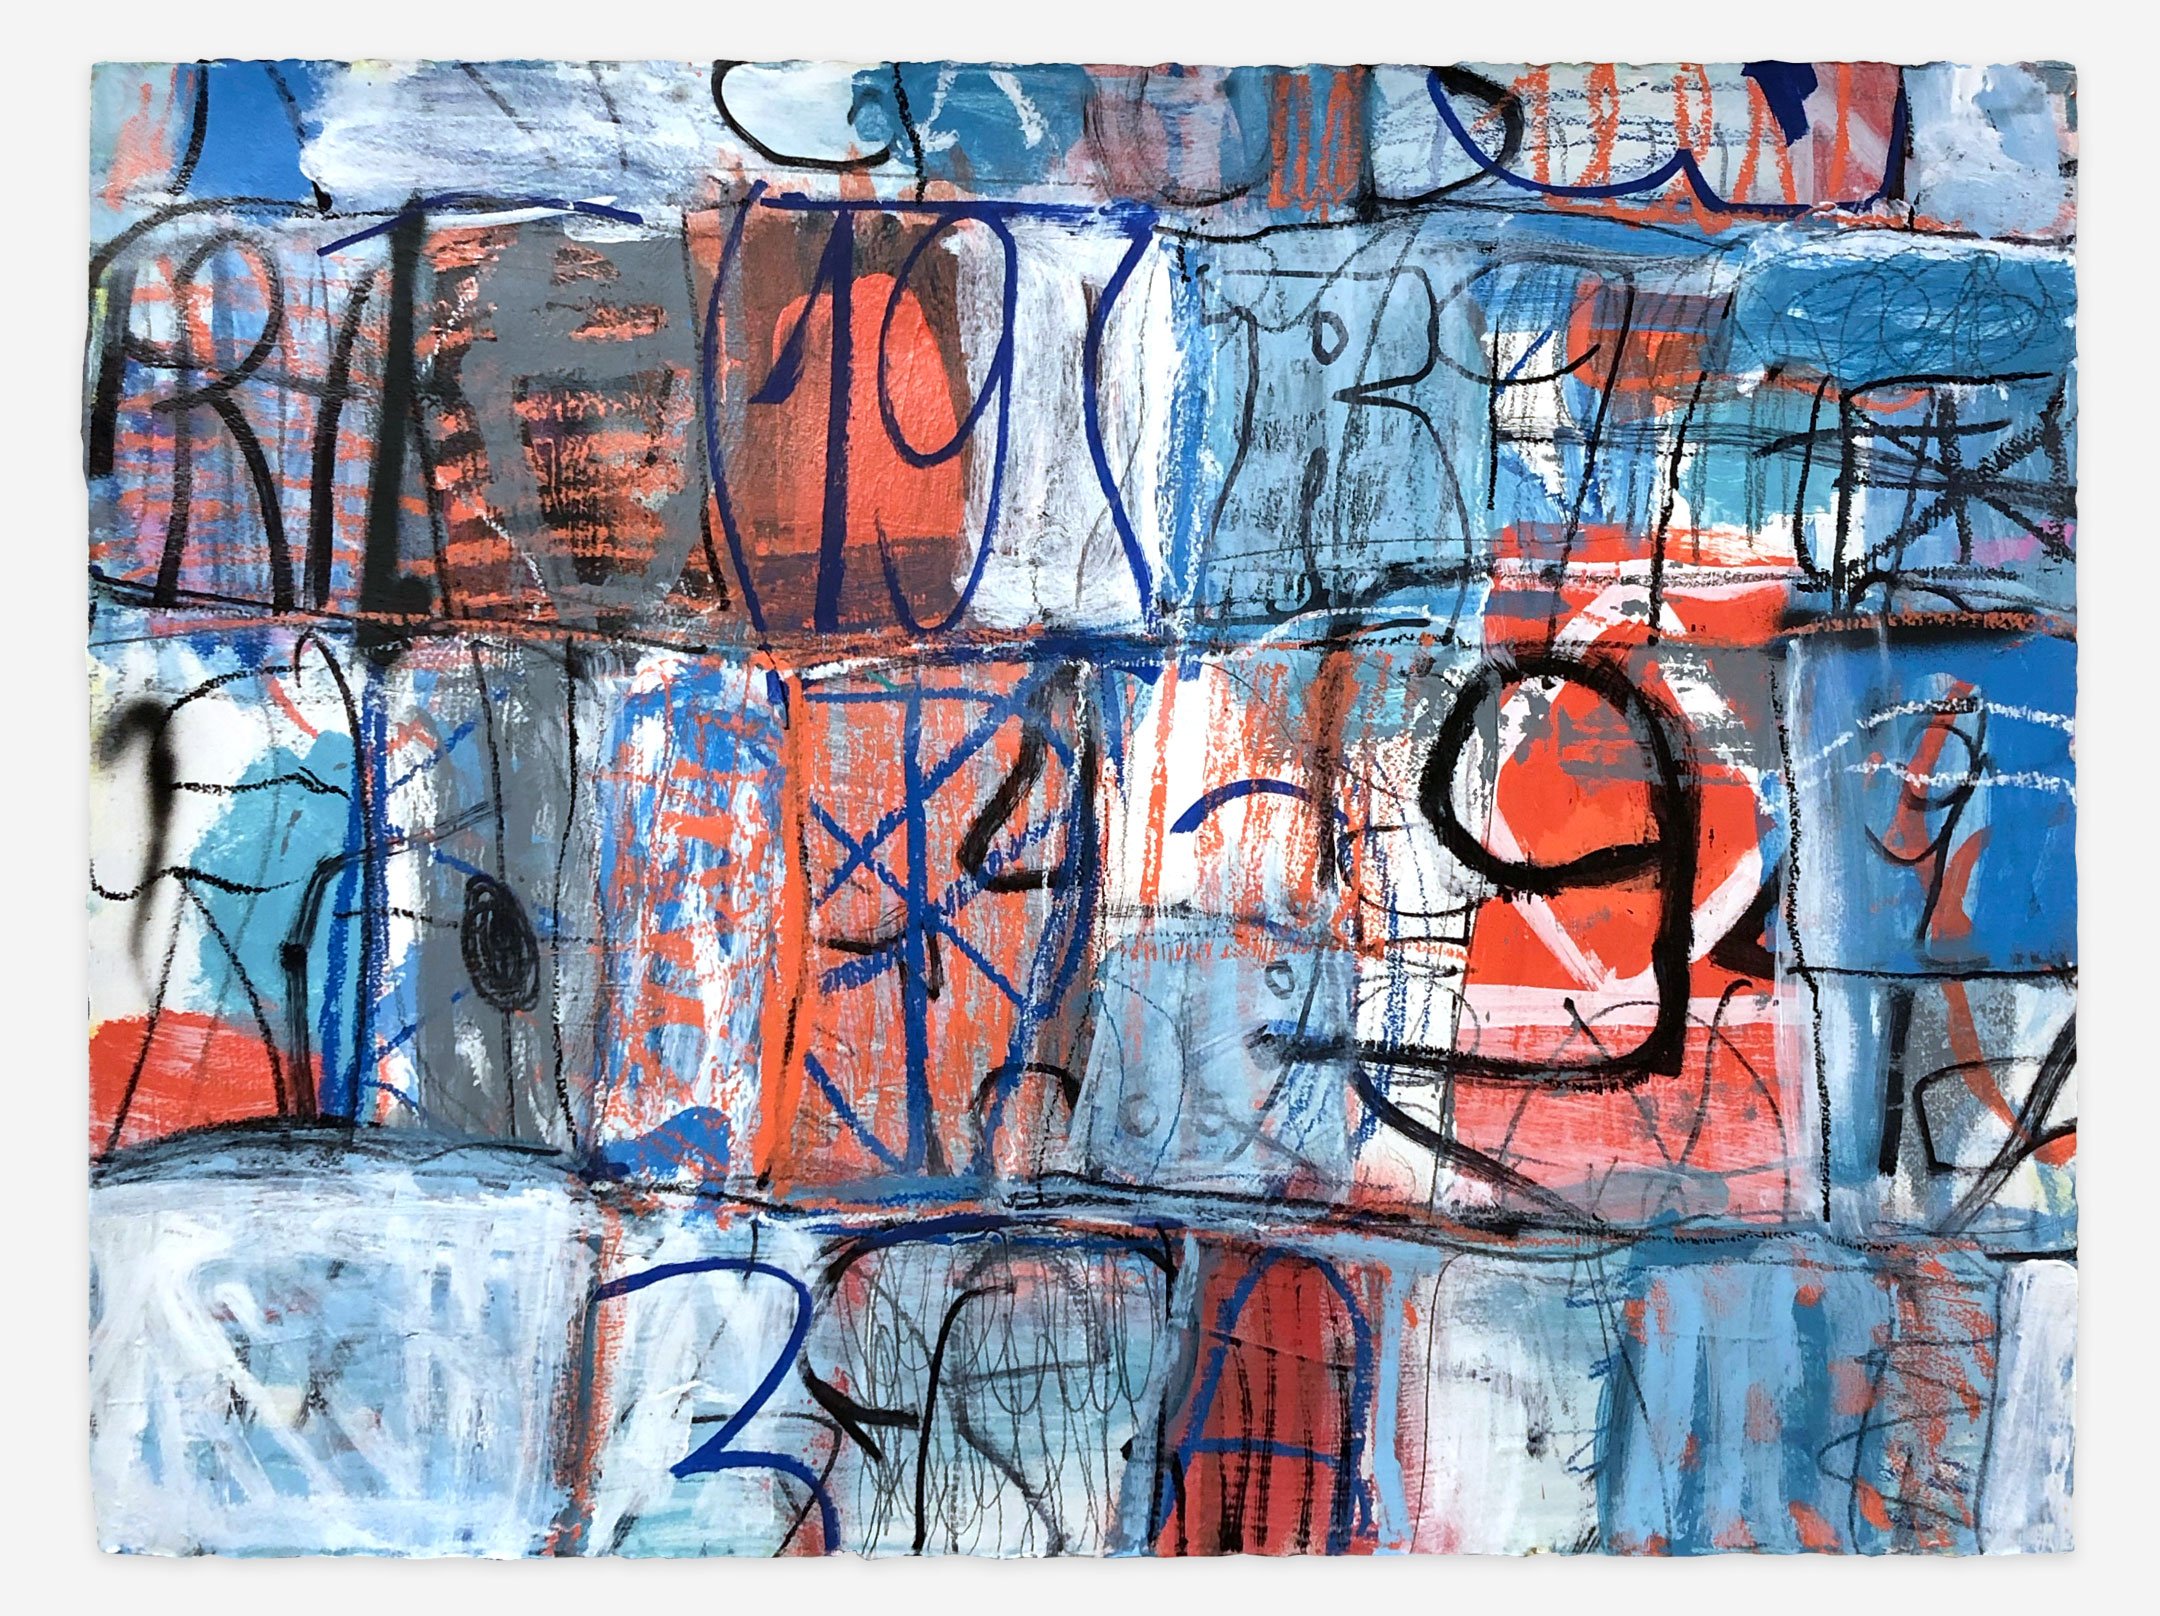   Untitled (022420,)  mixed media on paper, 30" x 22", 2020   $400.00 includes US shipping     BUY NOW     